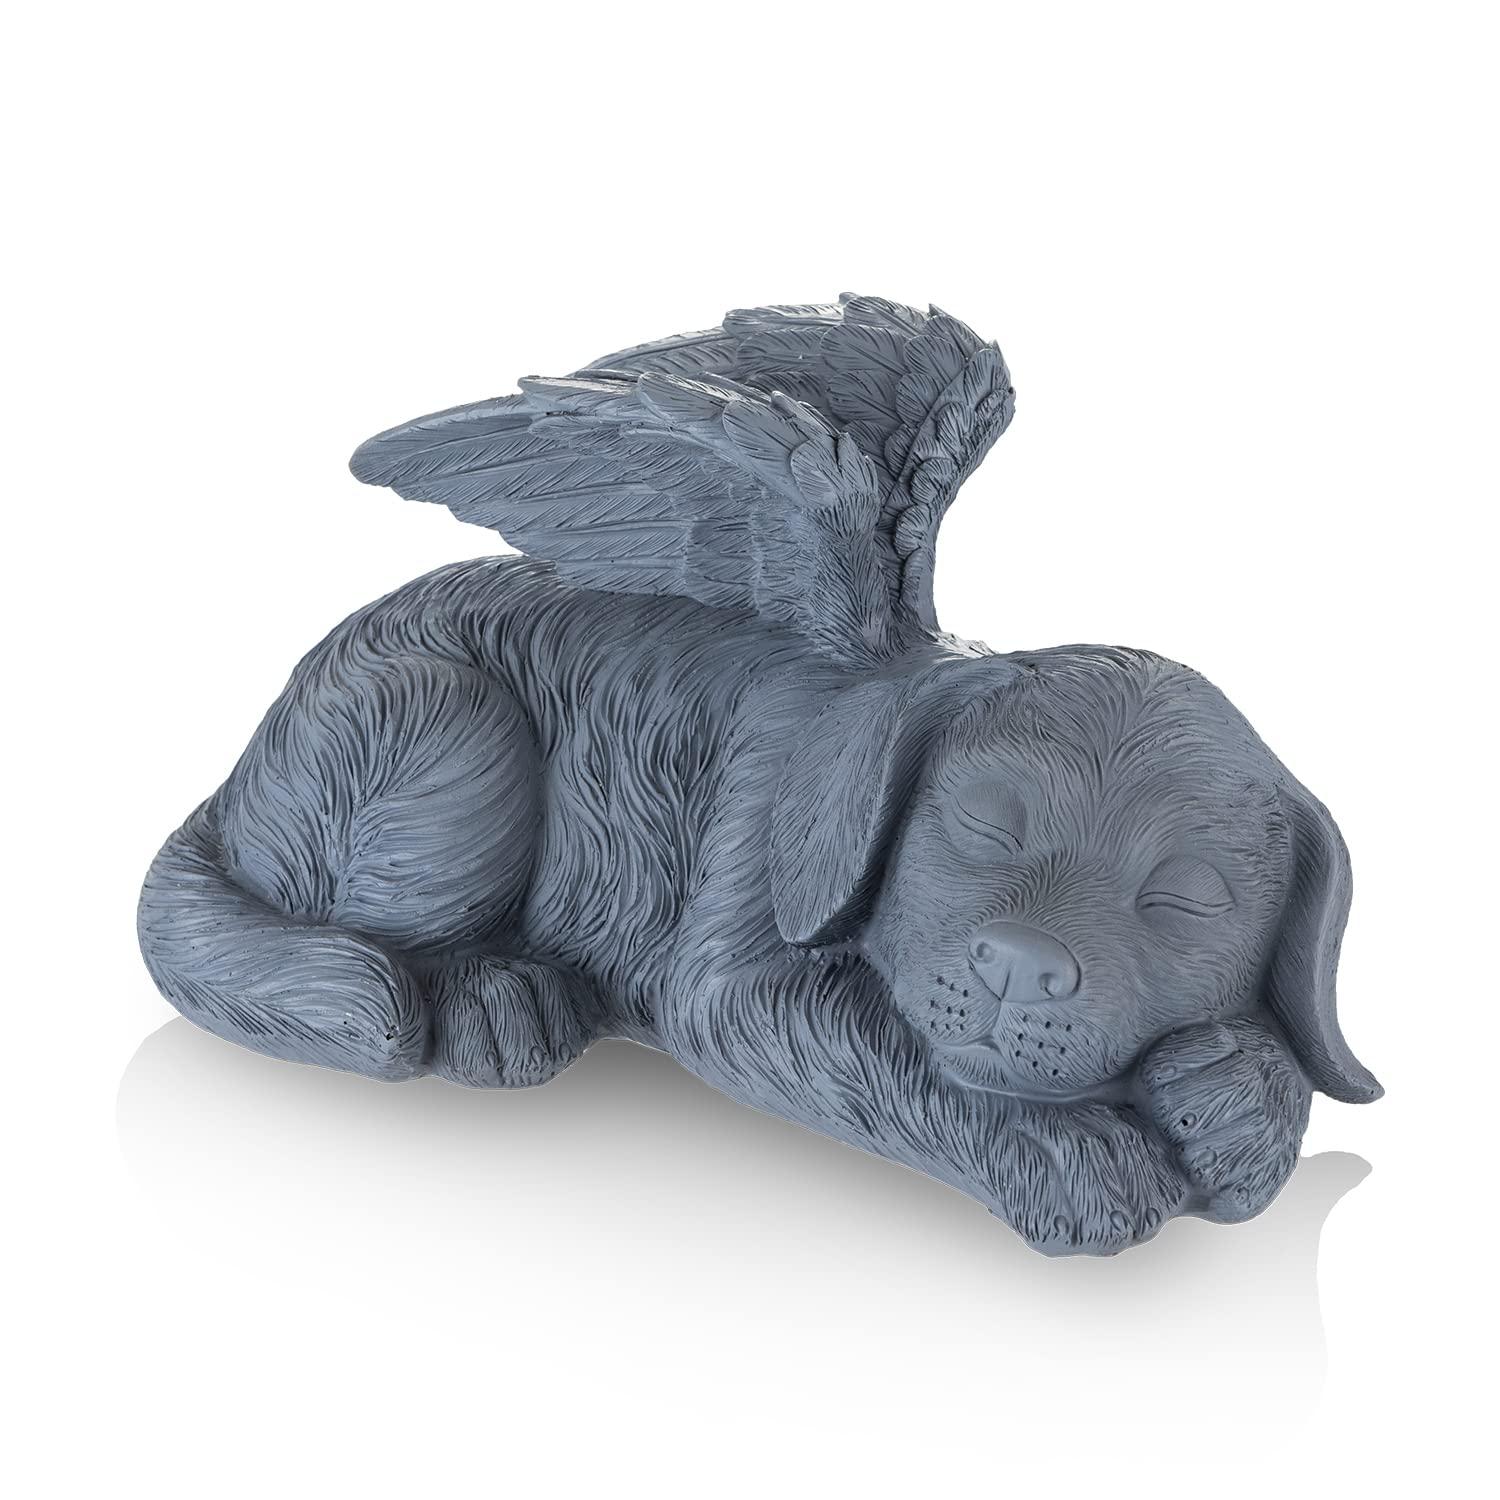 NEWDREAM:The Dog Angel Memorial Statue,Dog Angle Memorial Placed in Indoor Angel Decorations, Pet Tombstone Dogs Figurines, Pet Grave Markers Dog in Angel Wing Figurine.(Big Dog Grey)